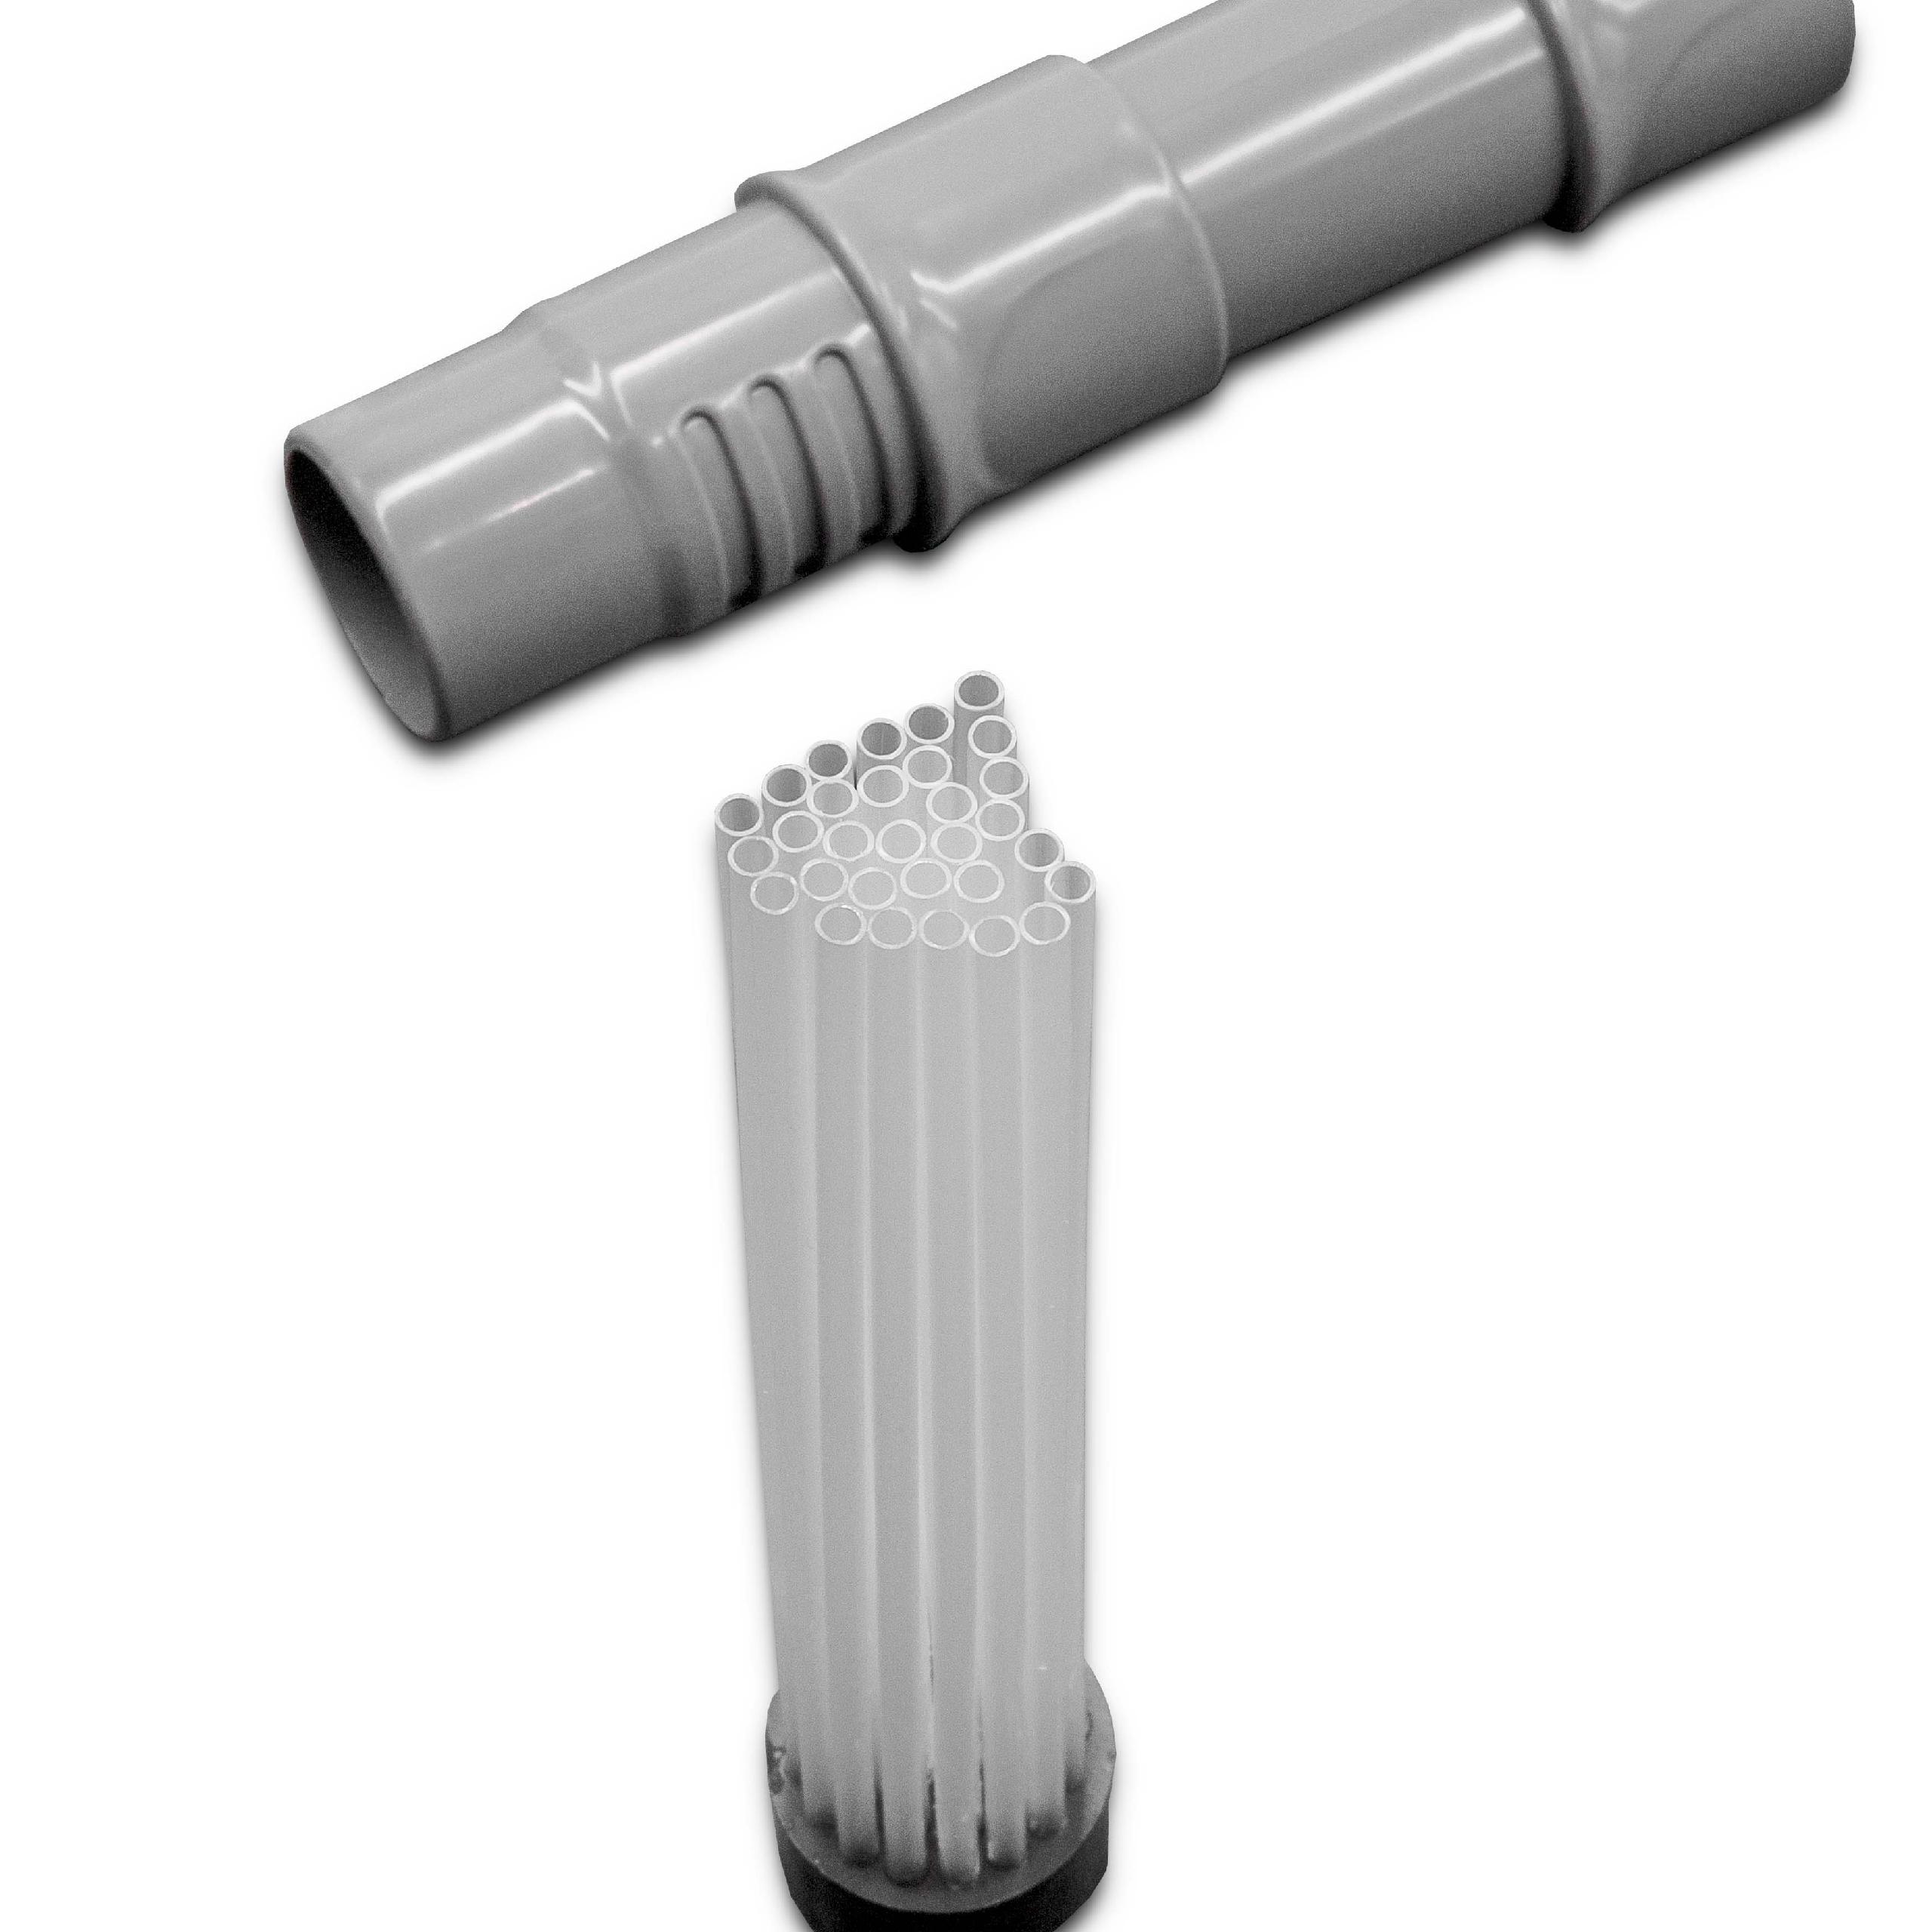  Brush for Vacuum Cleaner - Furniture Brush with Long, Flexible Tubes 